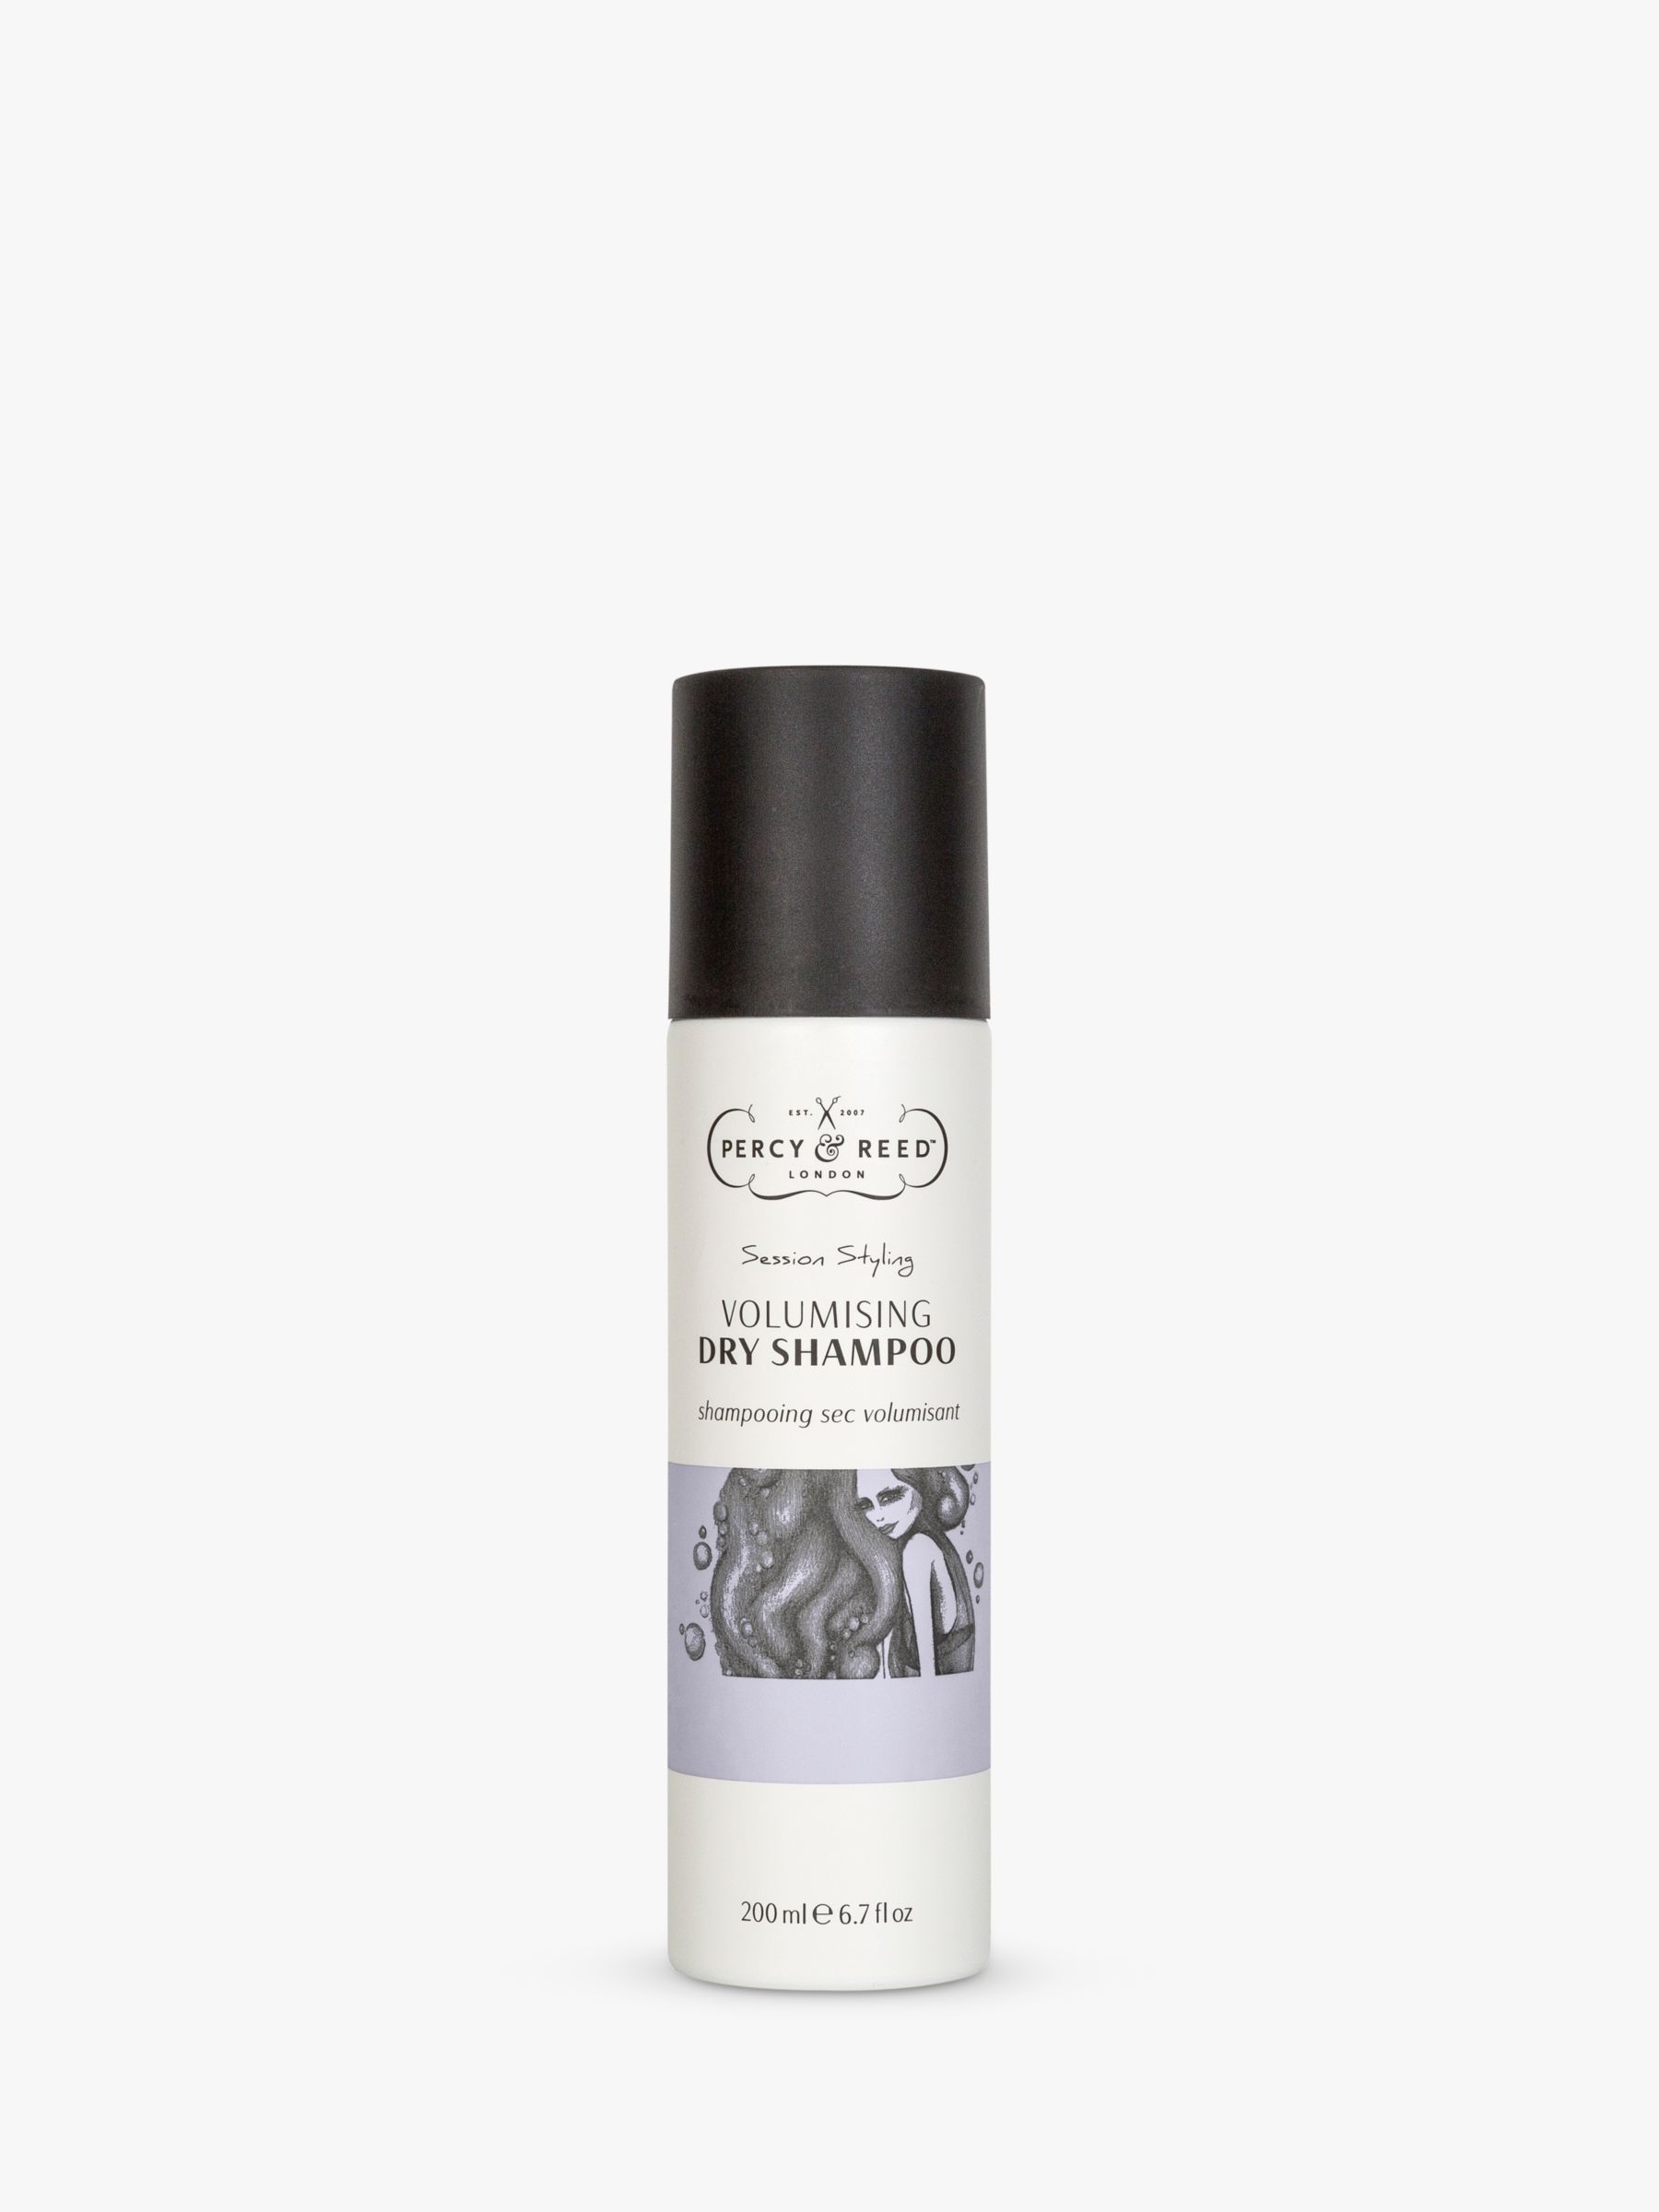 Percy & Reed Session Styling Volumising Dry Shampoo, 200ml 1